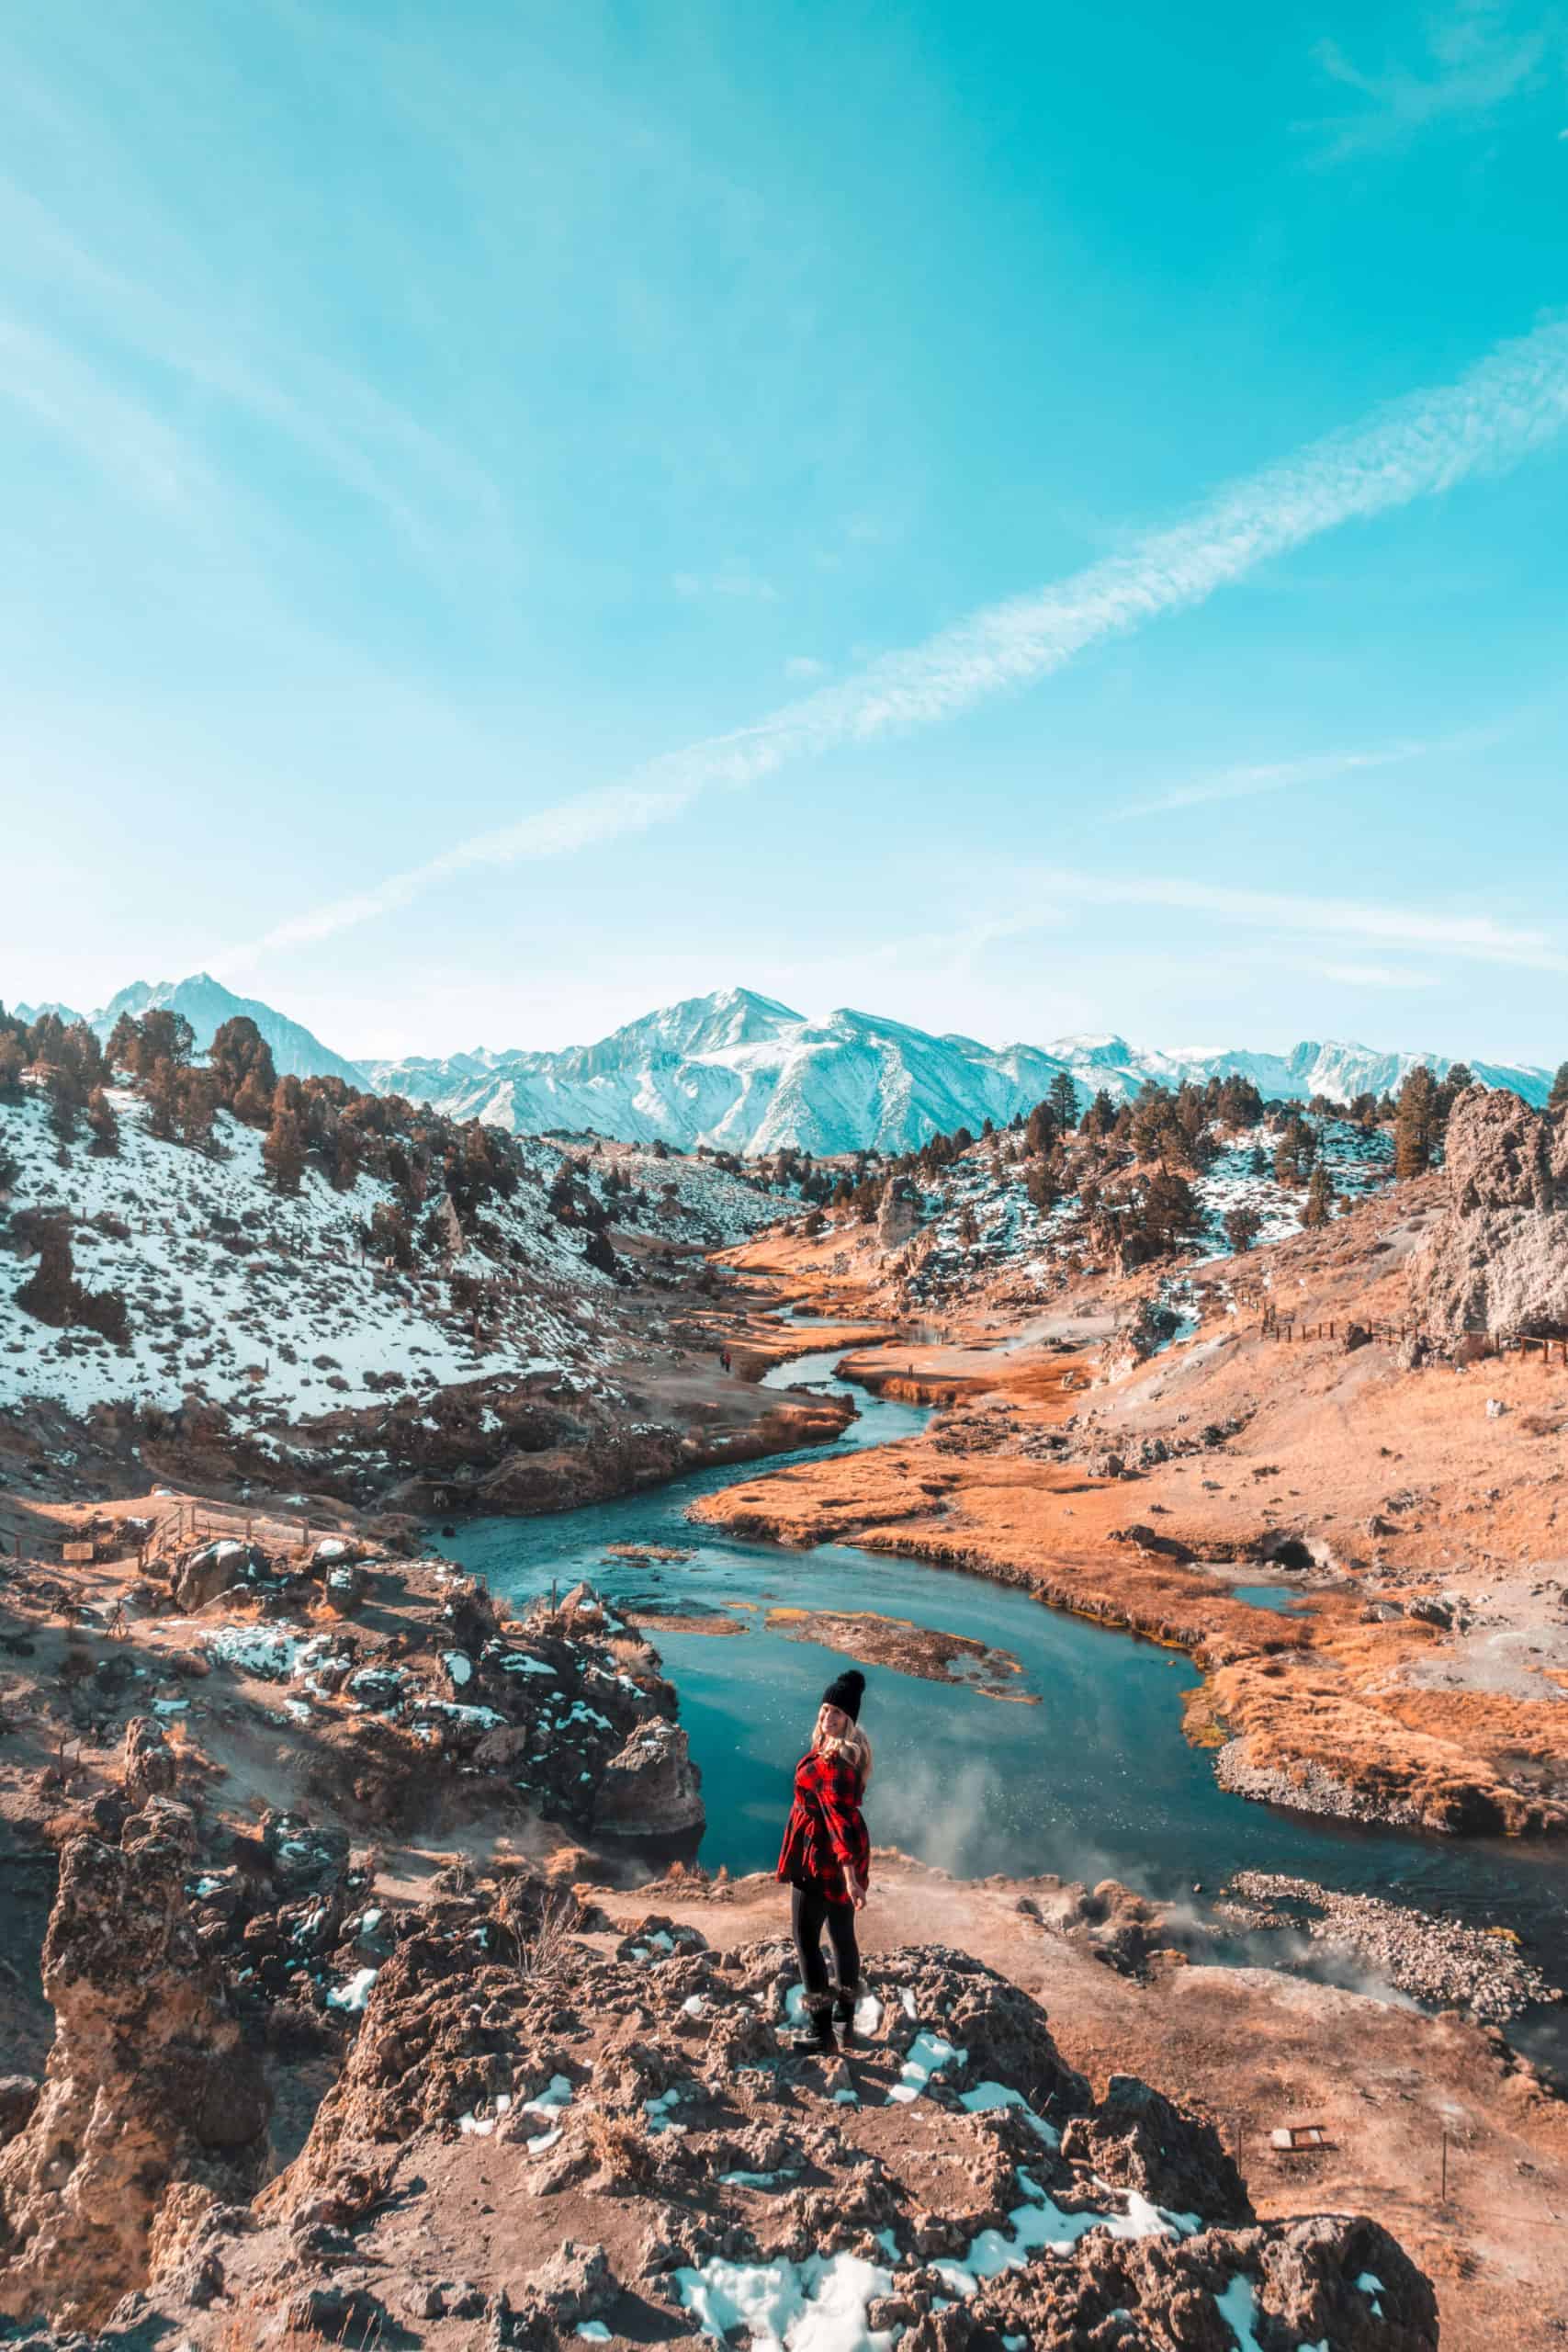 Mammoth Hot Creek Geological Site | The Ultimate Guide to Mammoth Lakes in the Winter